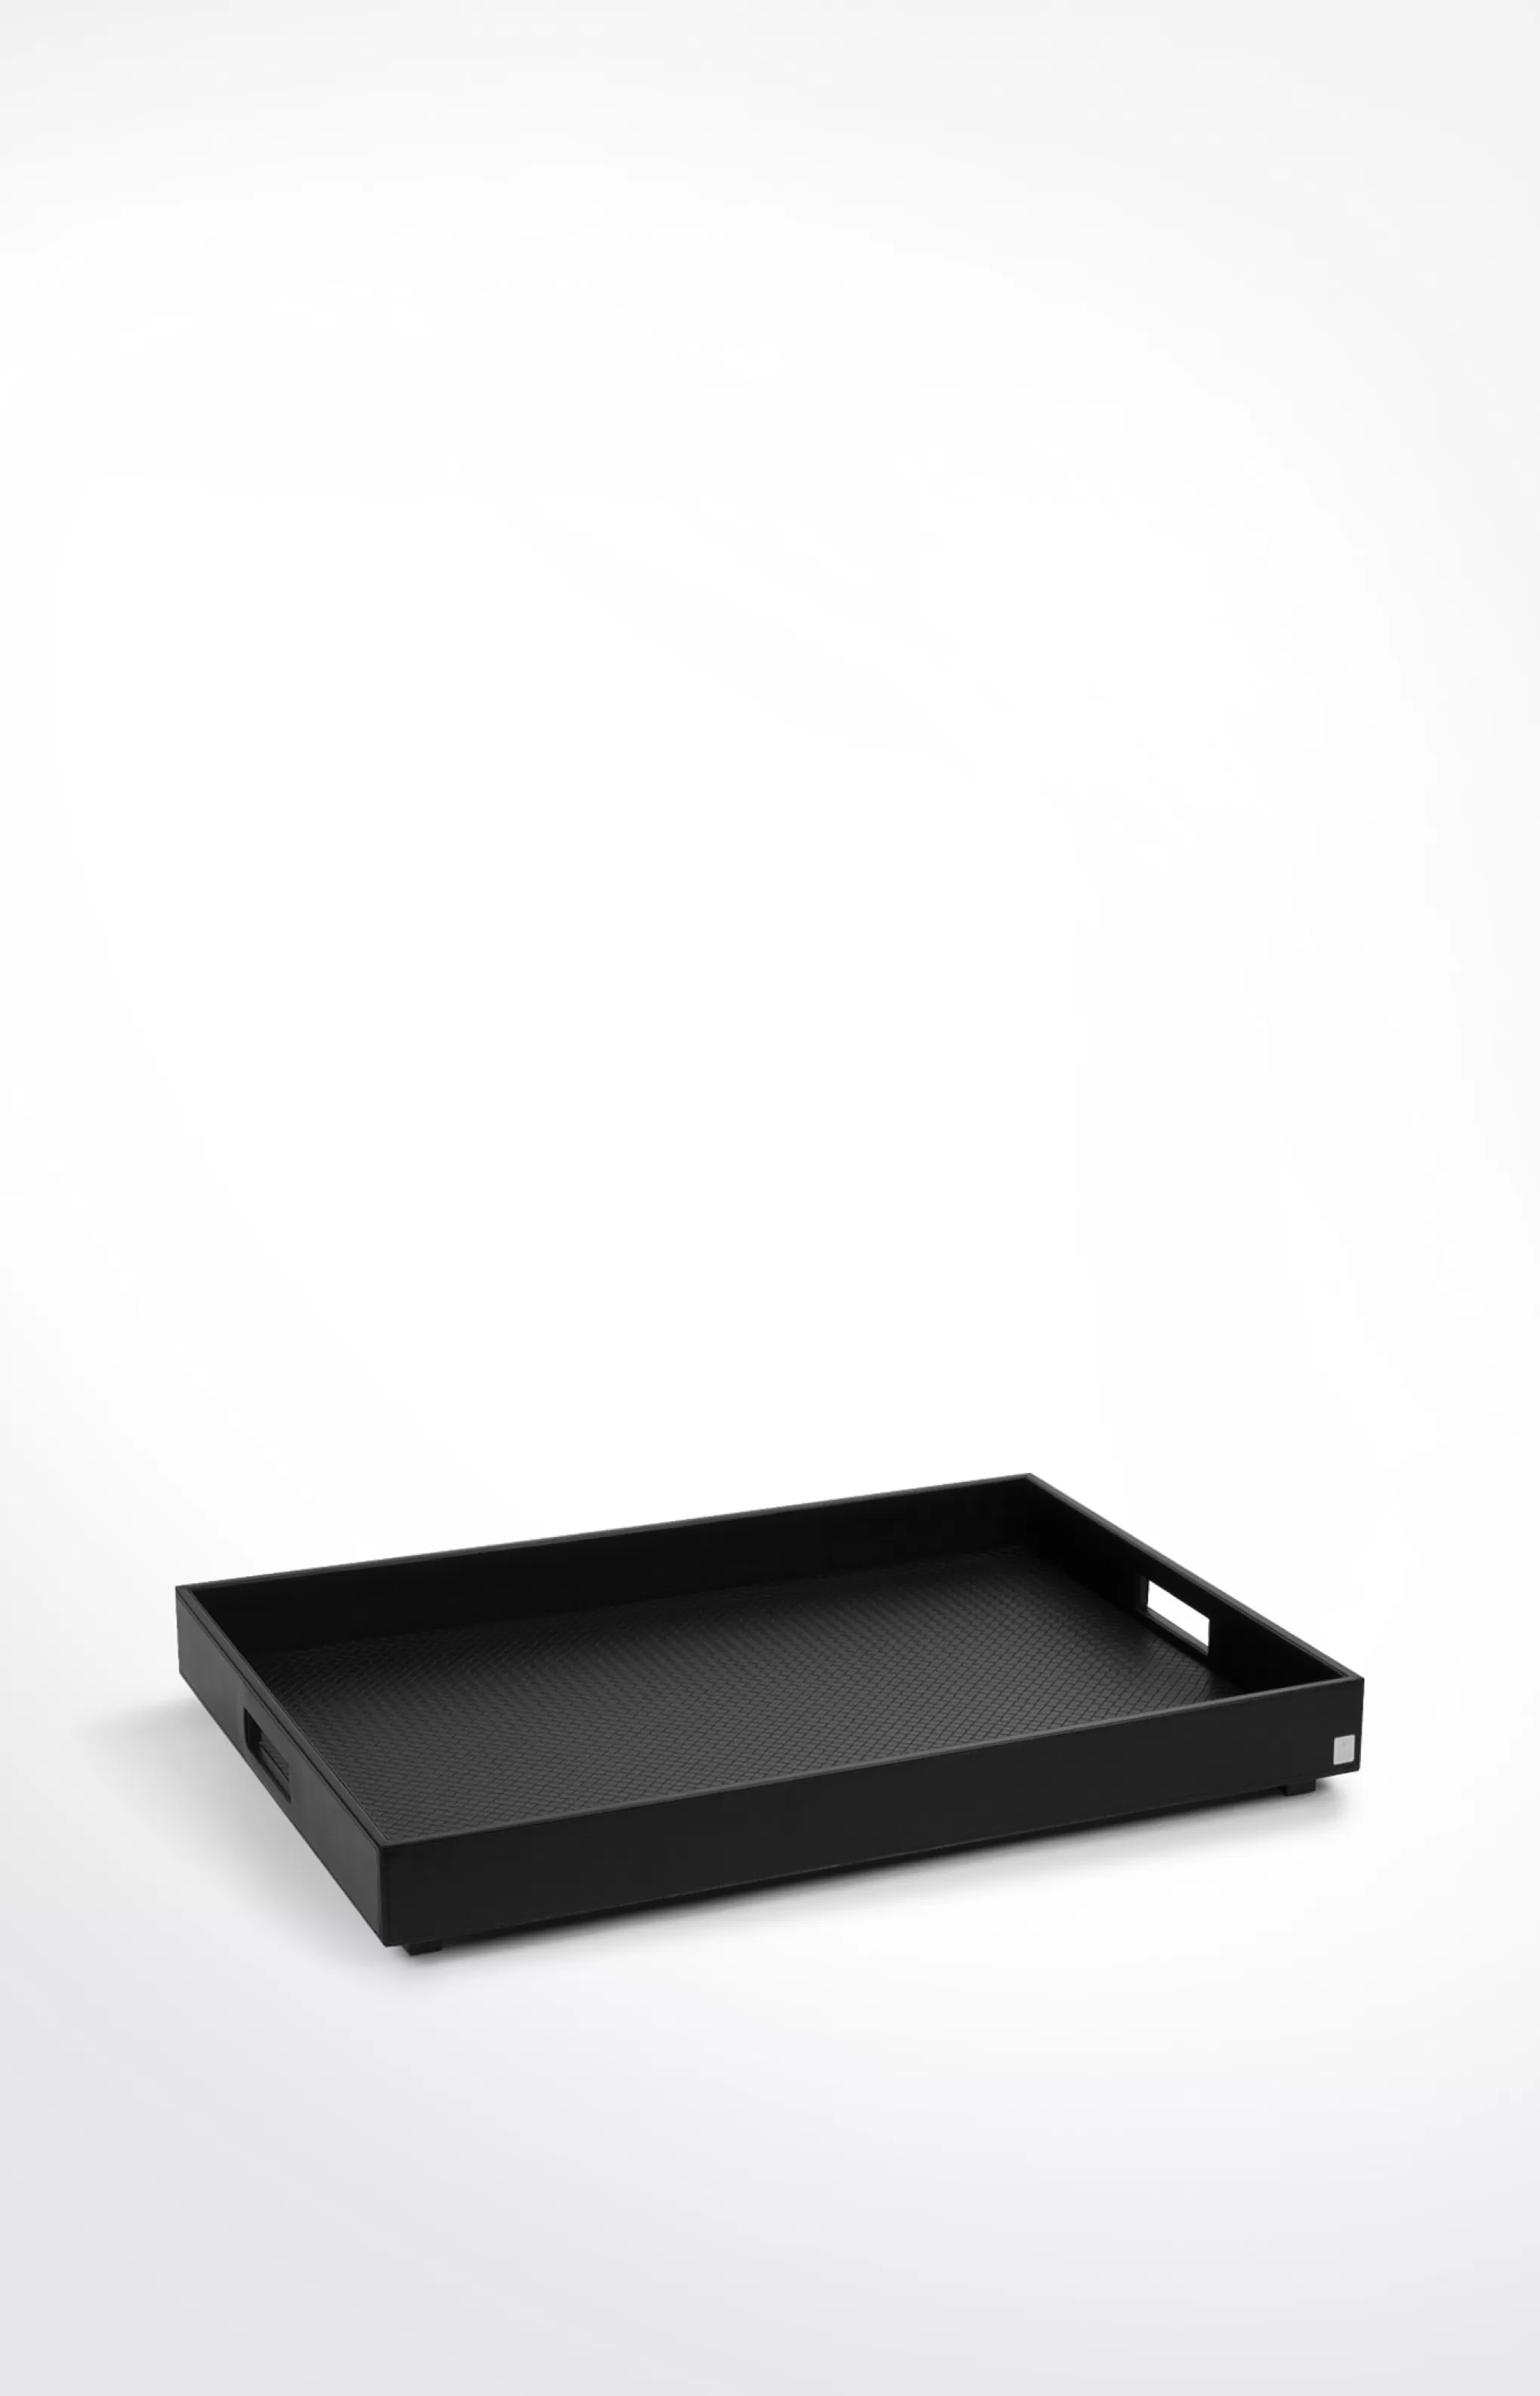 Bathroom Accessories | Discover Everything | Home Accessories | Table Accessories*JOOP Bathroom Accessories | Discover Everything | Home Accessories | Table Accessories Large Homeline tray, black